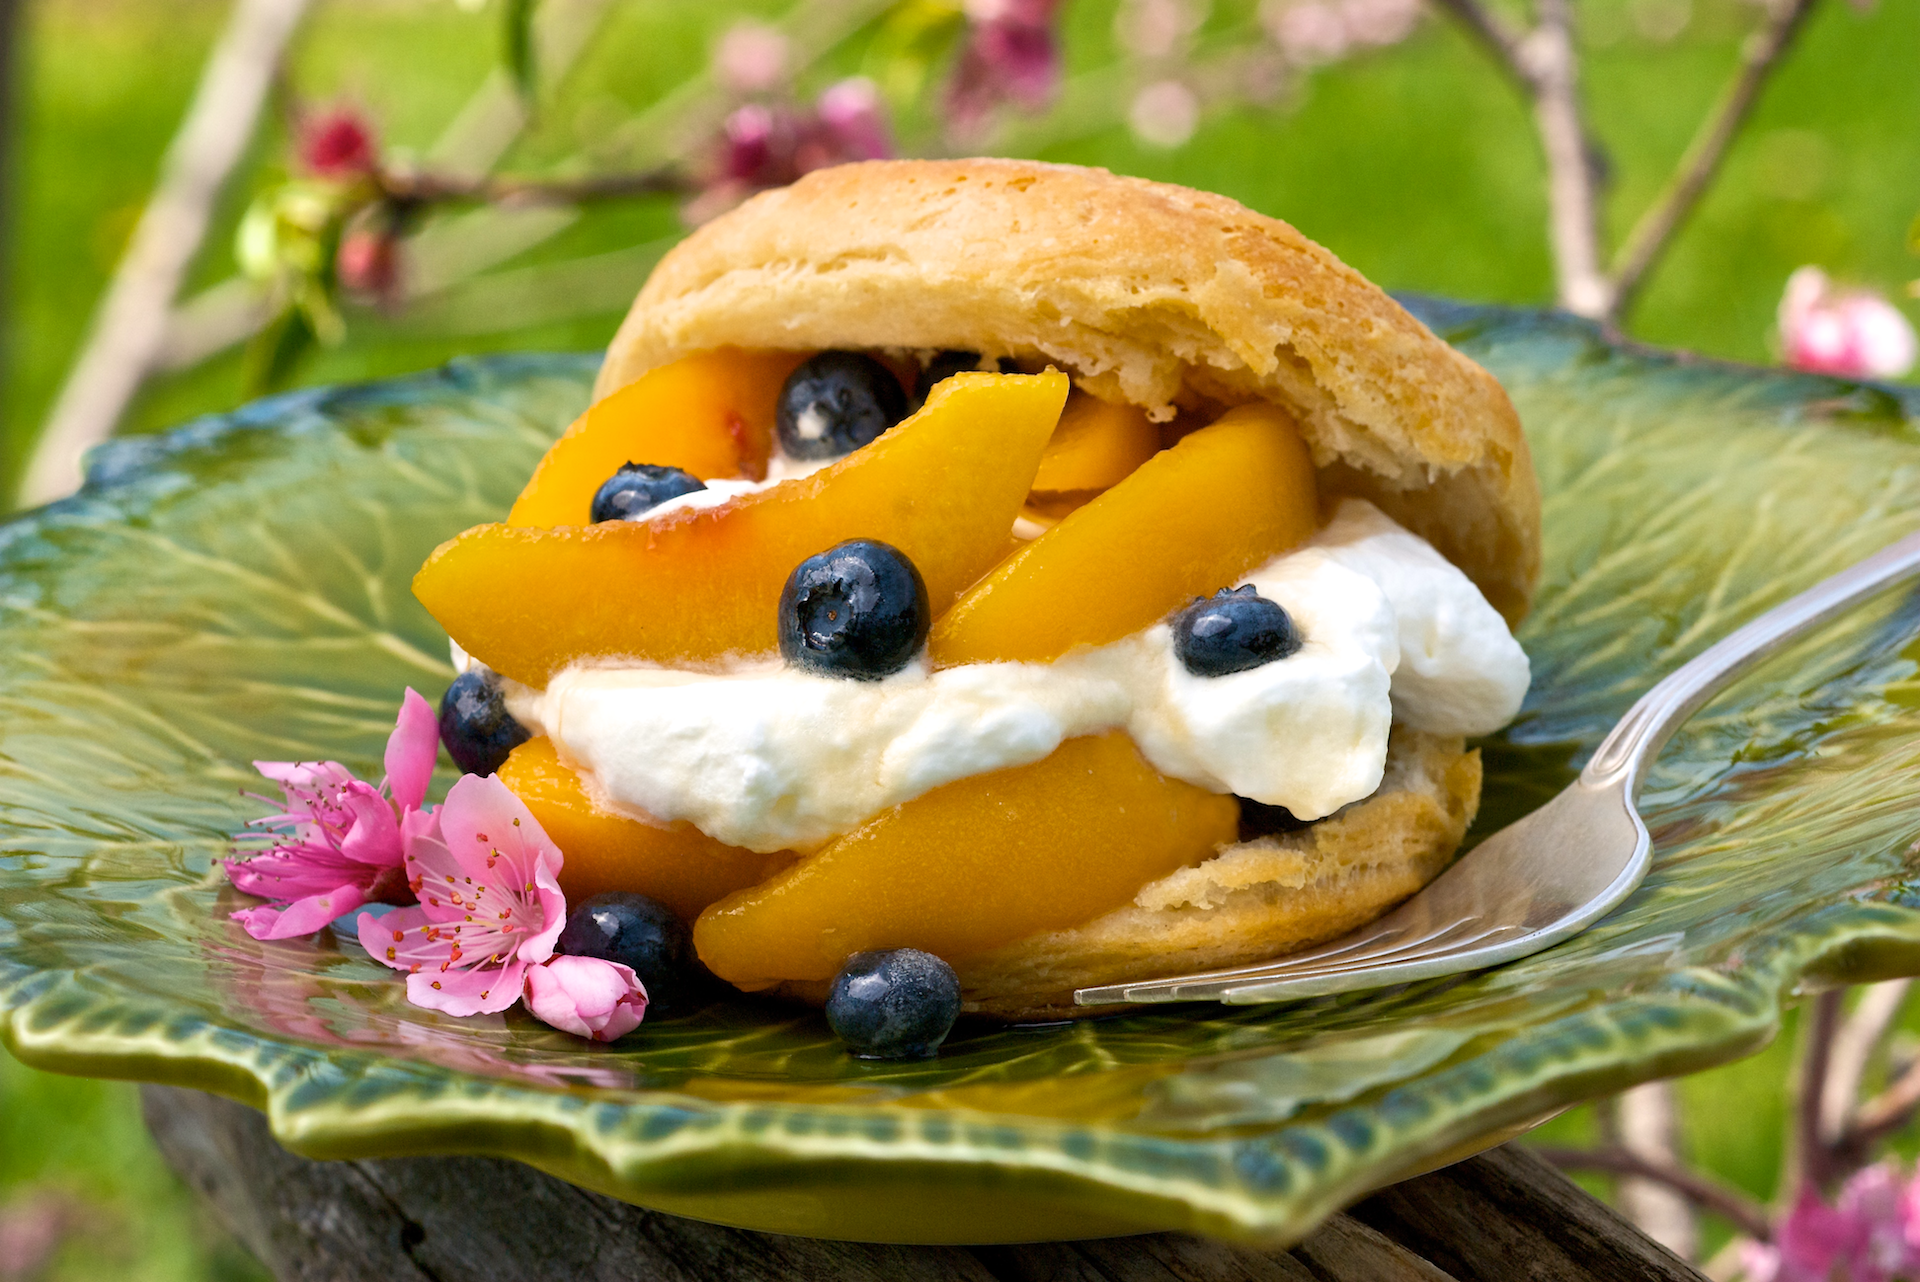 Light and airy, these biscuits are cake-like when they’re topped with cream and sugar, and then stuffed with bright peaches, blueberries, and pillows of whipped cream.